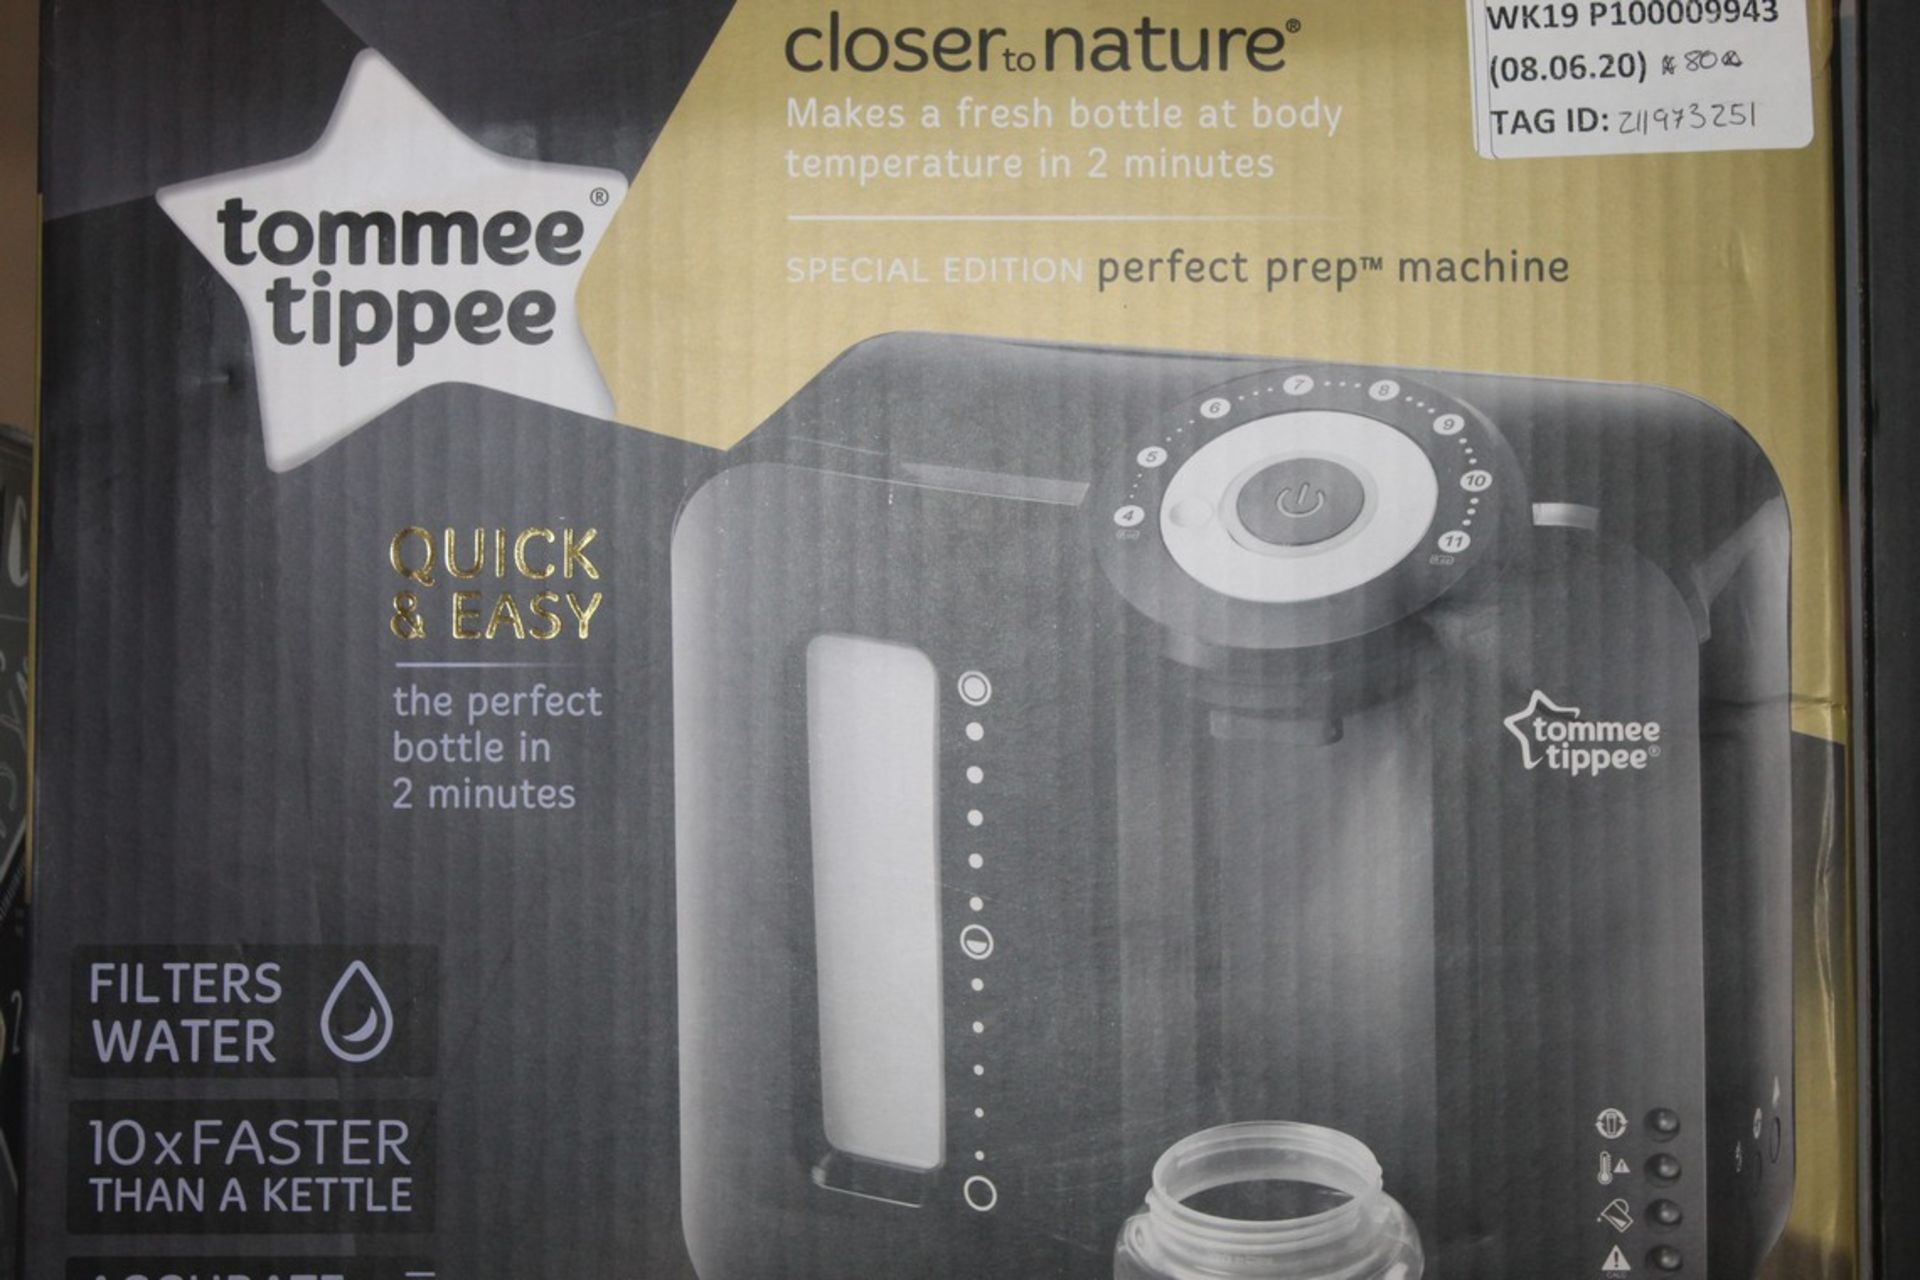 Boxed Tommee Tippee Closer To Nature Perfect Preparation Bottle Warming Station Black Edition RRP £